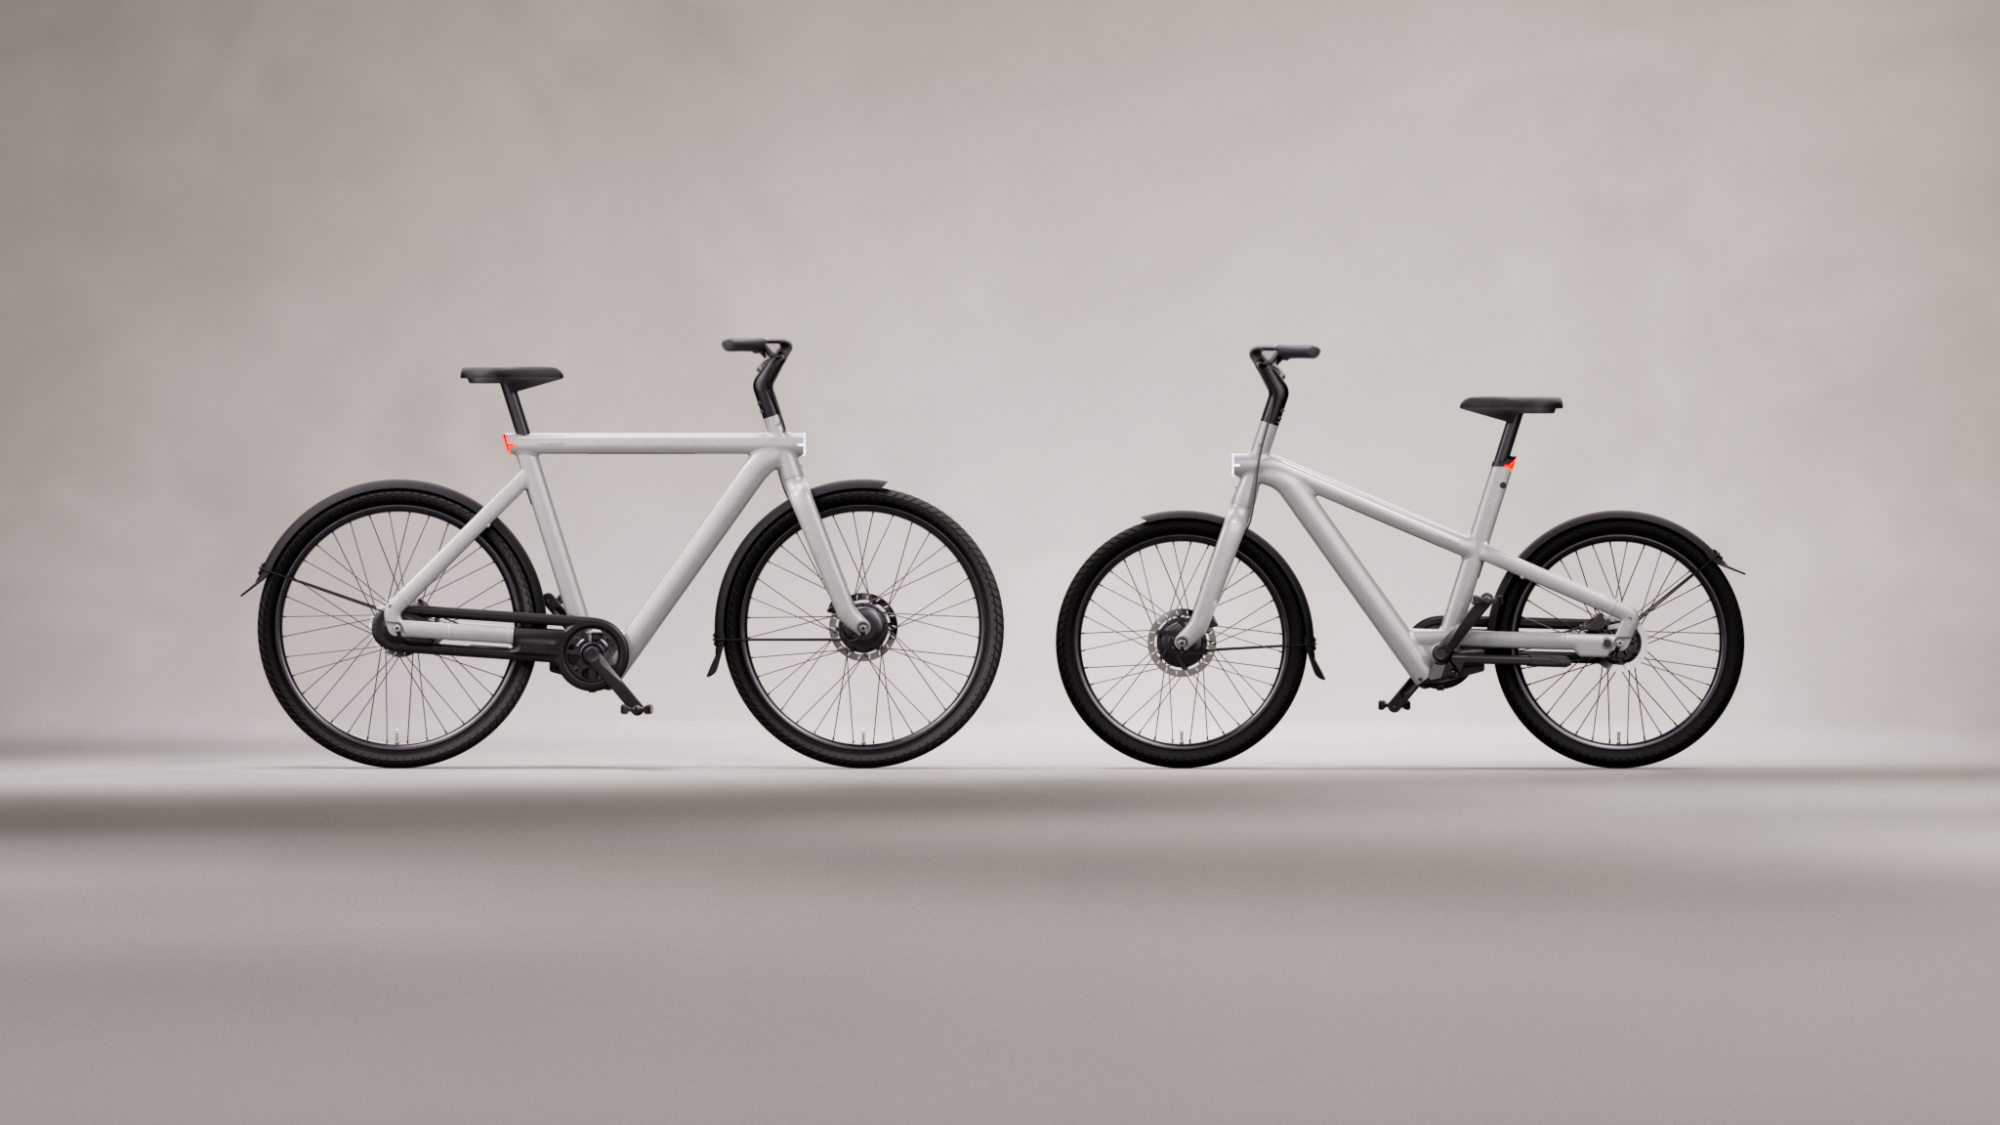 VanMoof A5 and S5 Inflation Leads to Price Hikes for Electric Bike New Models